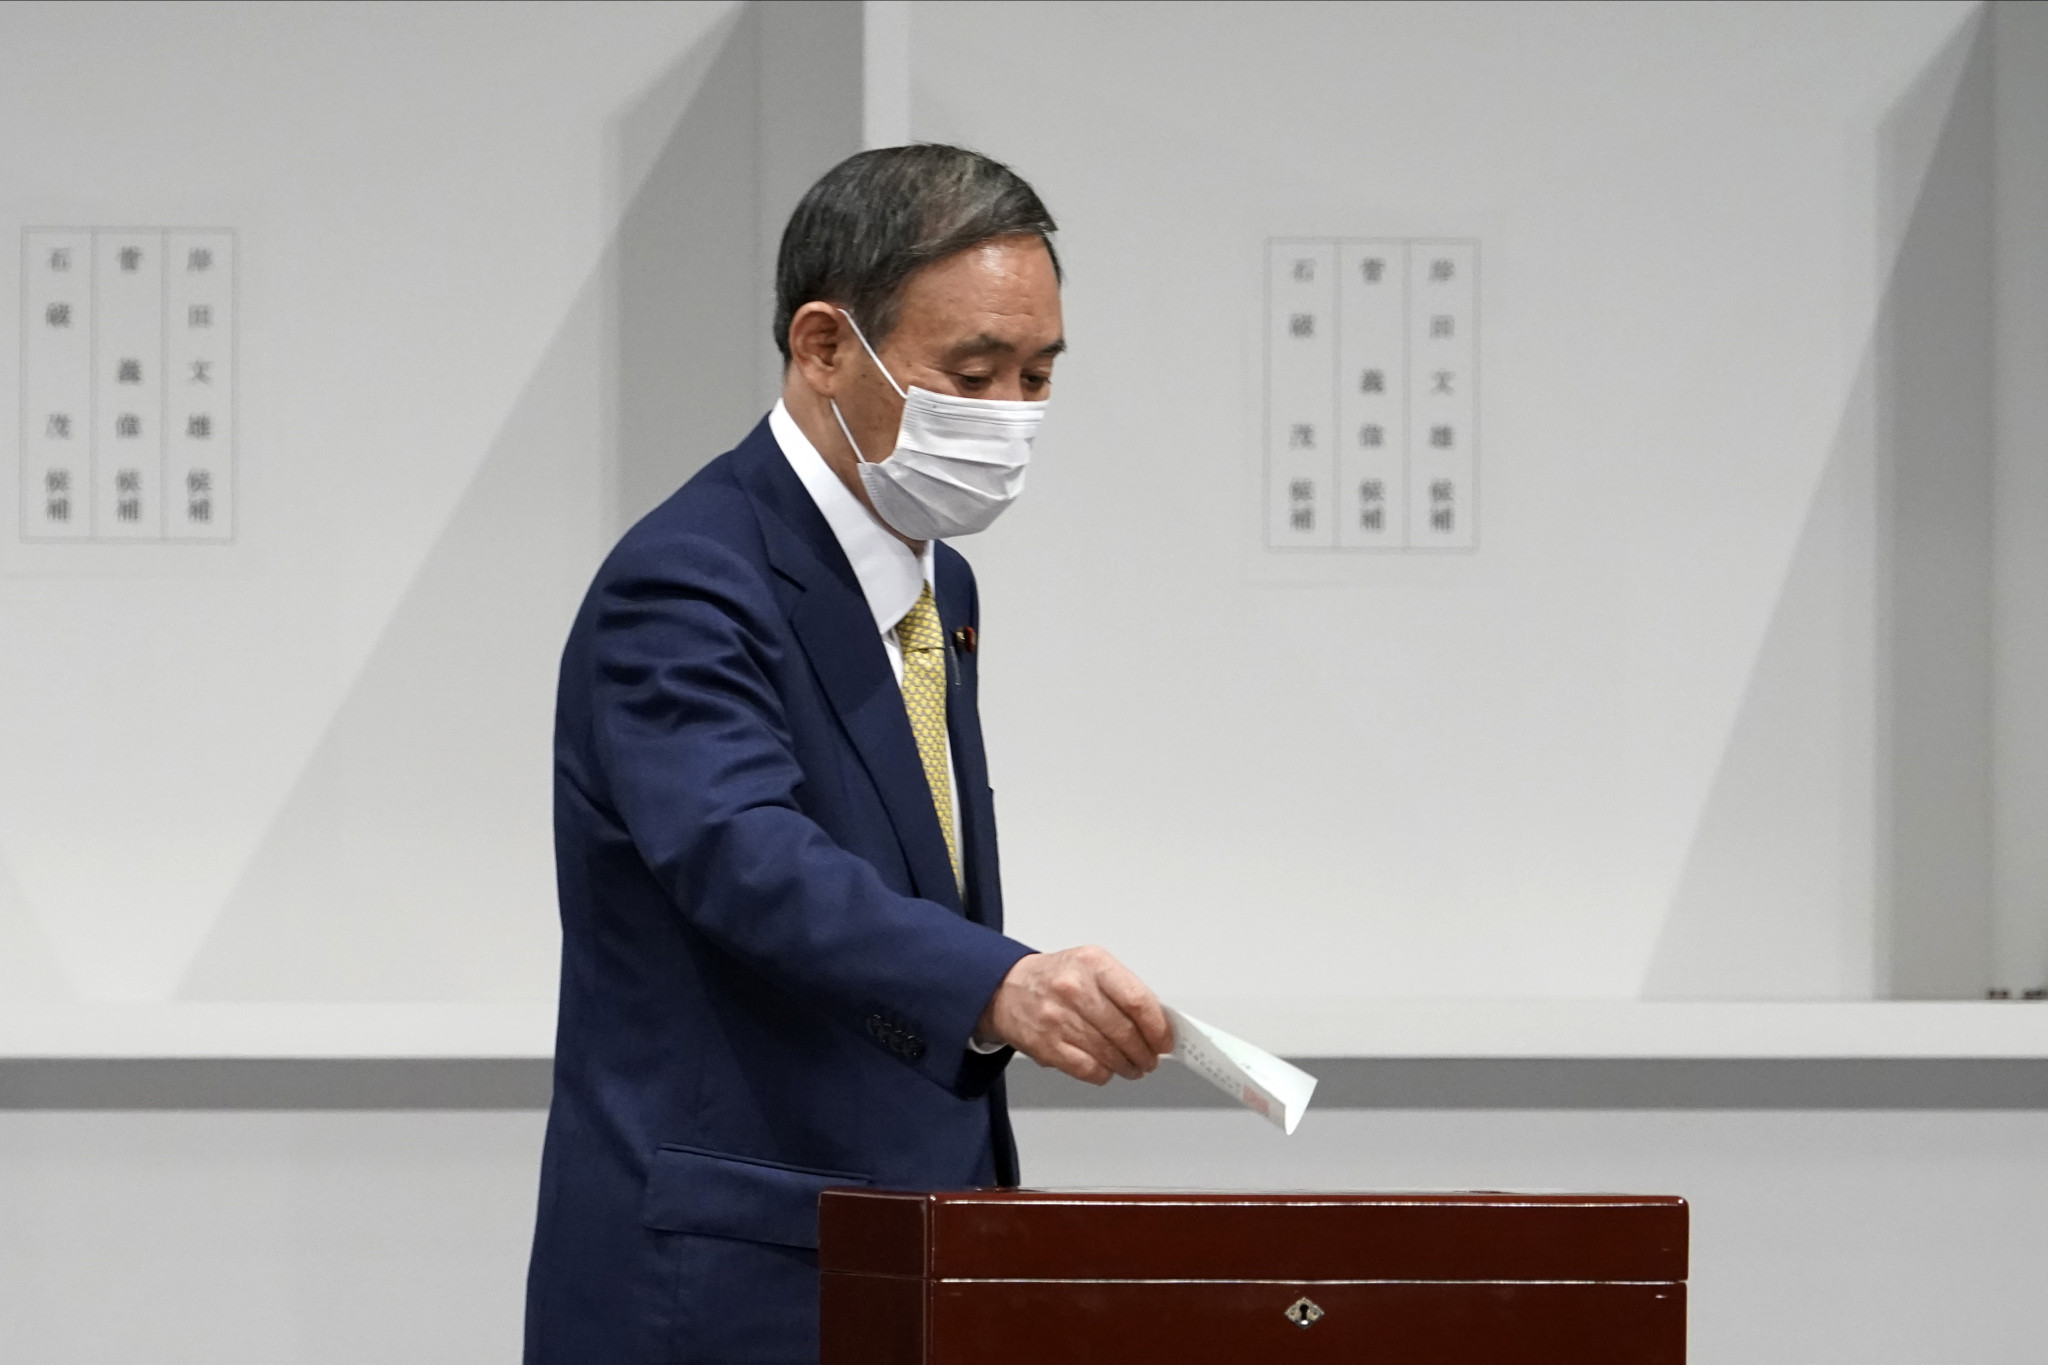 Yoshihide Suga casts his vote in today's leadership election ©Getty Images